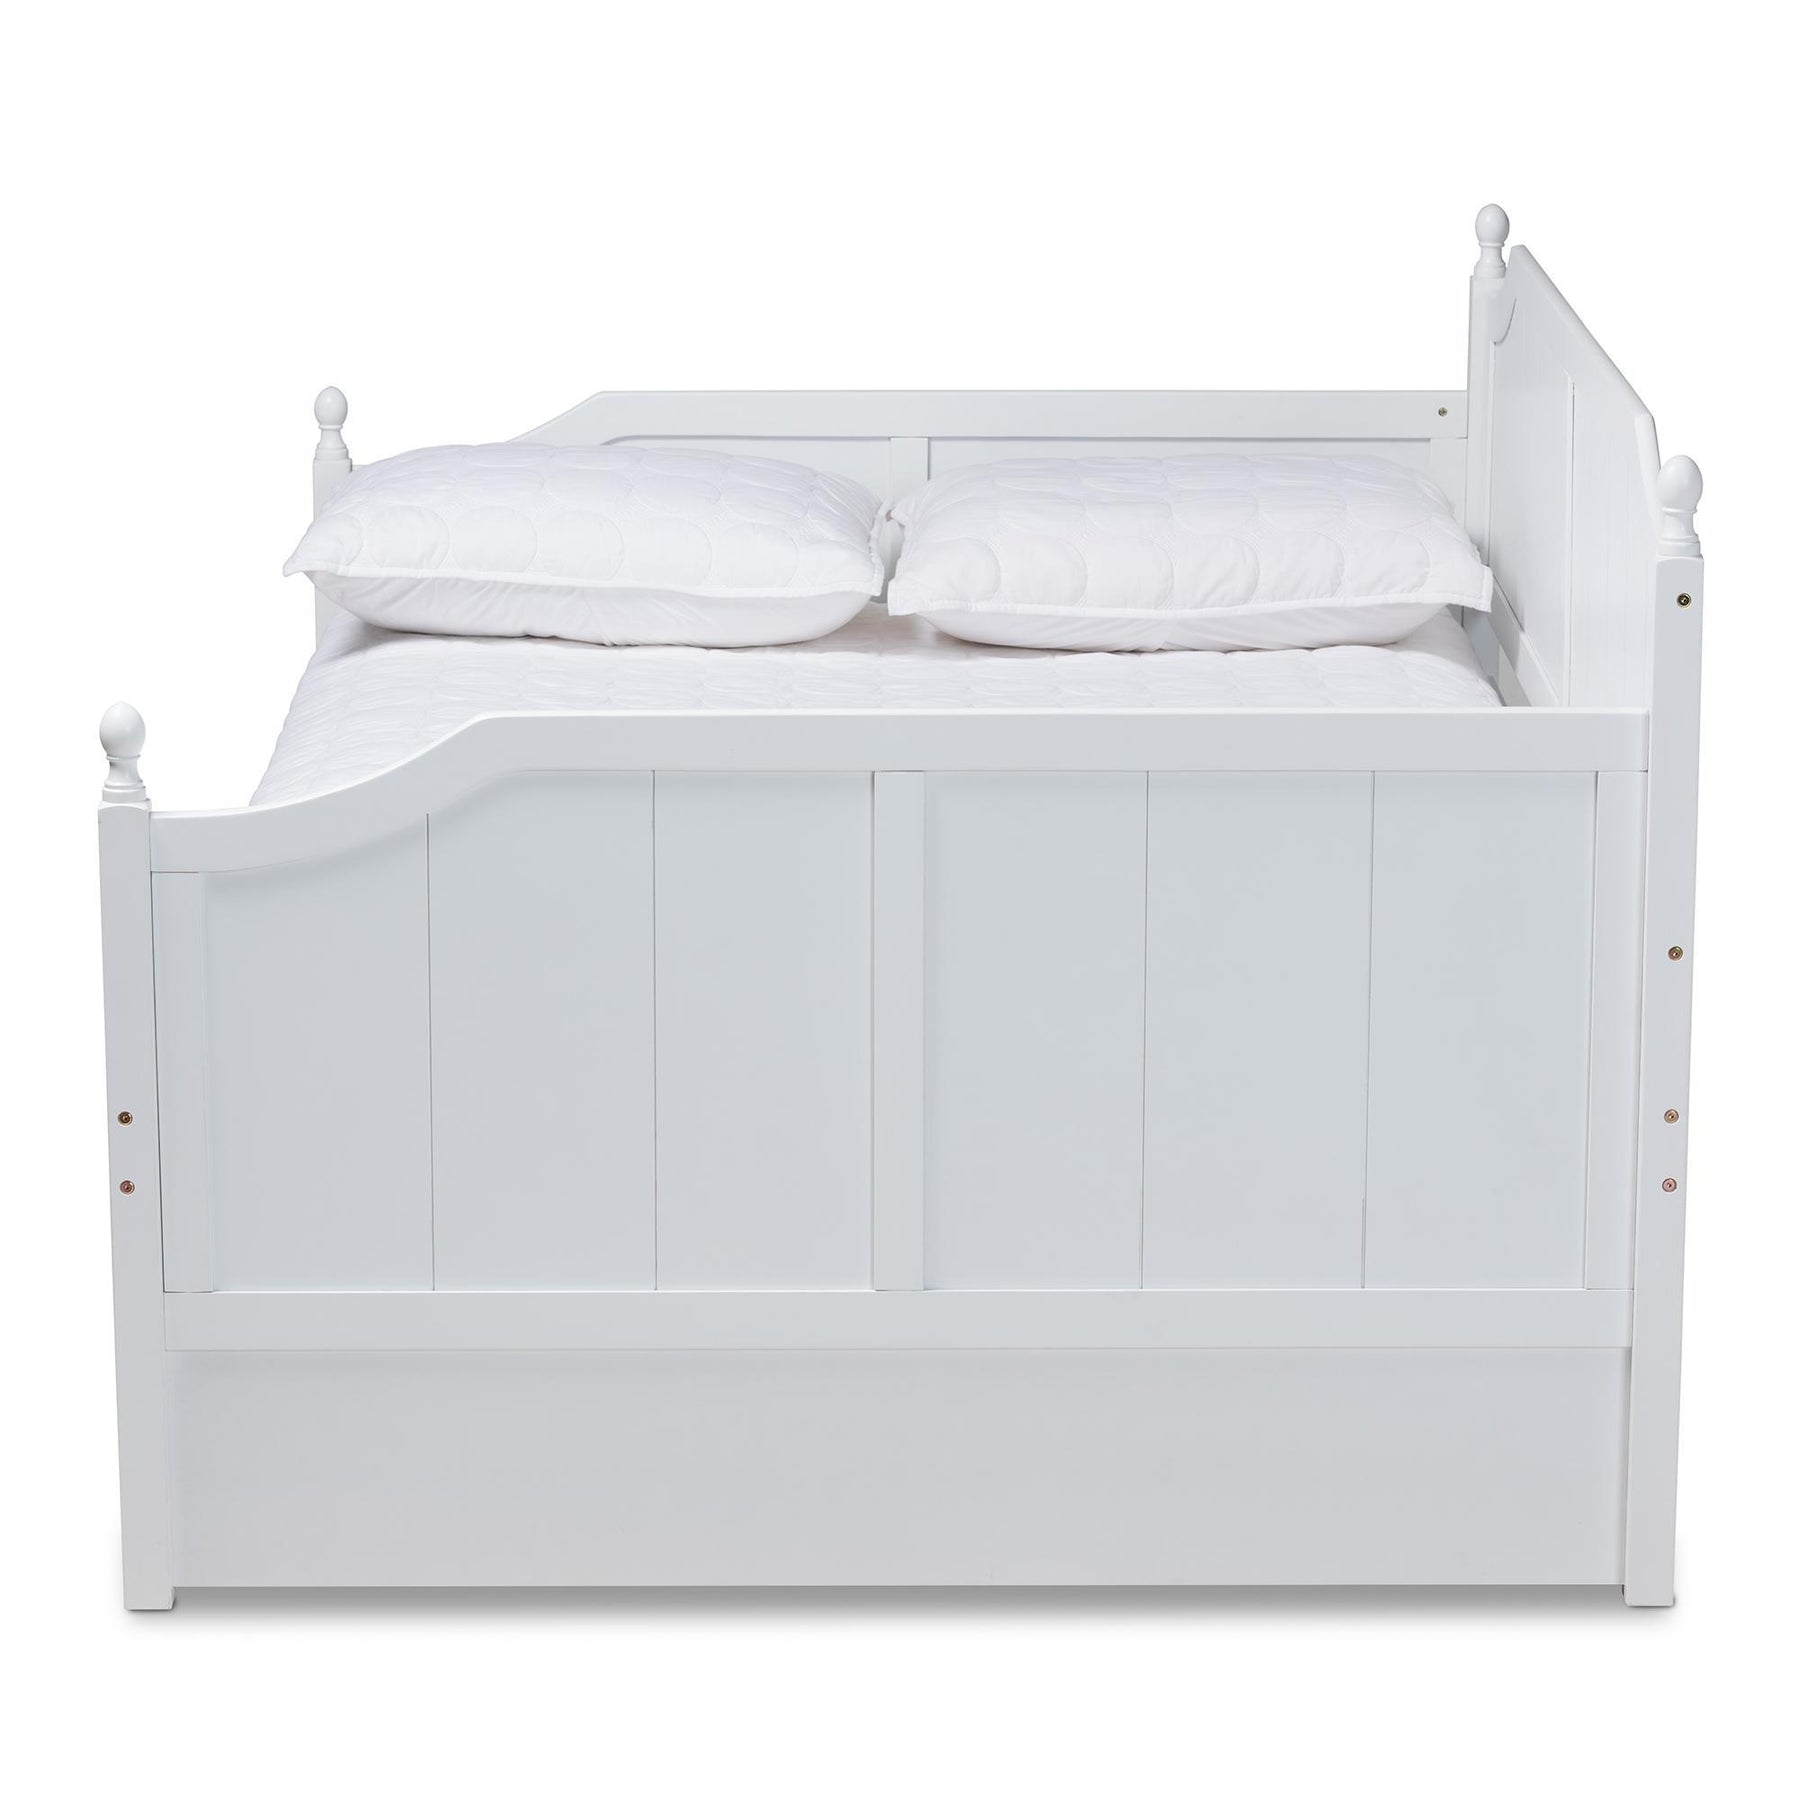 Baxton Studio Millie Cottage Farmhouse White Finished Wood Full Size Daybed With Trundle - MG0010-White-Daybed-Full